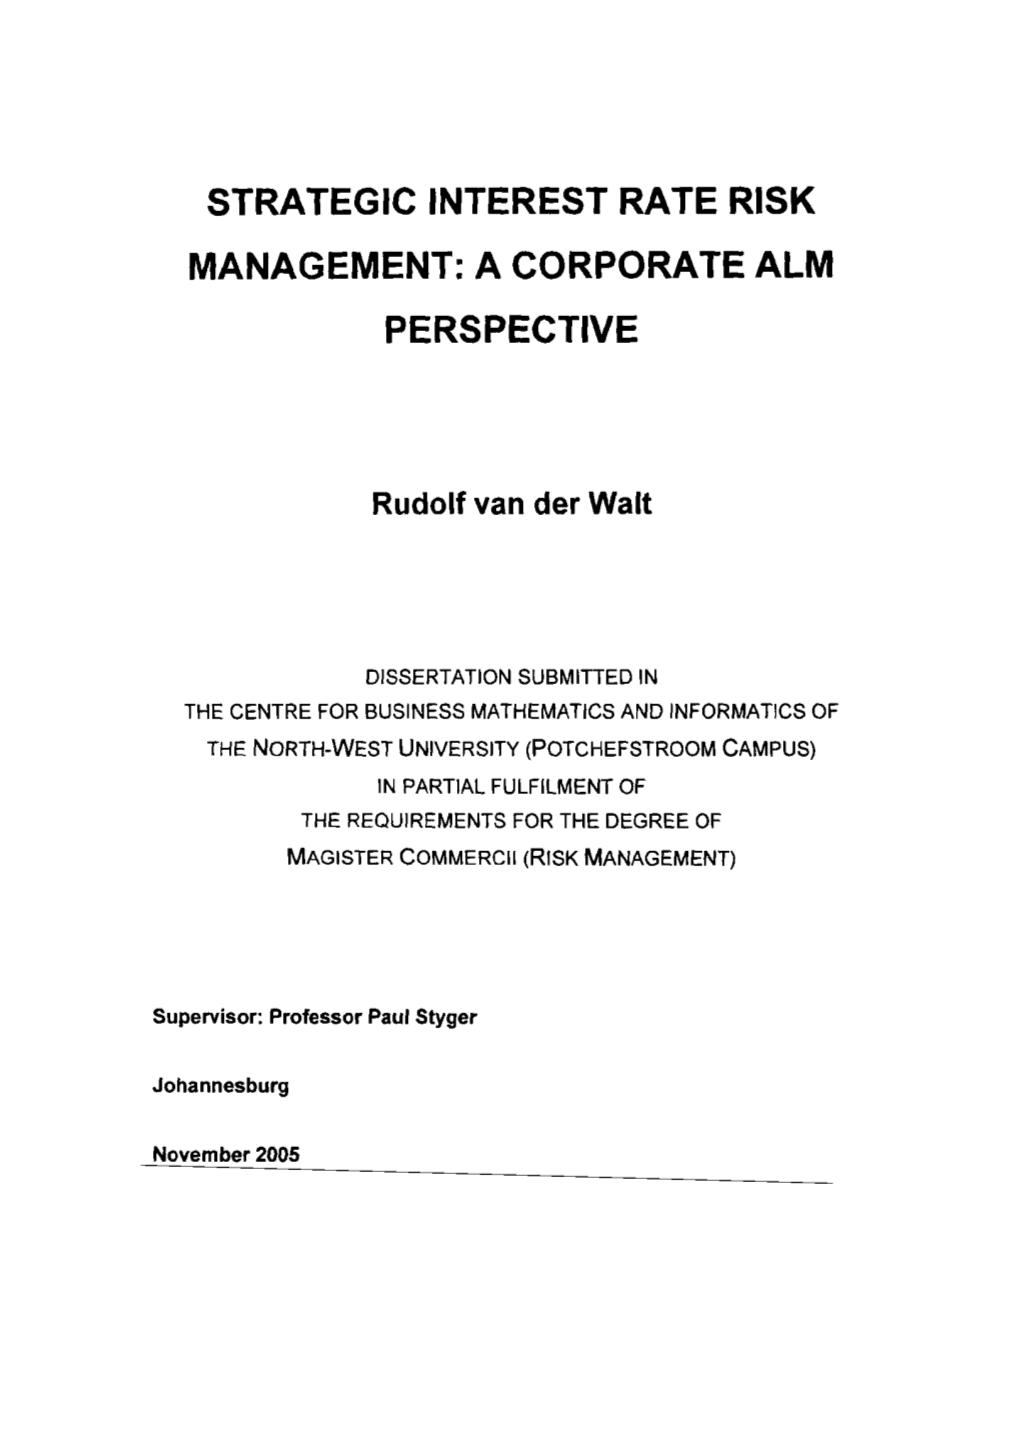 Strategic Interest Rate Risk Management: a Corporate Alm Perspective